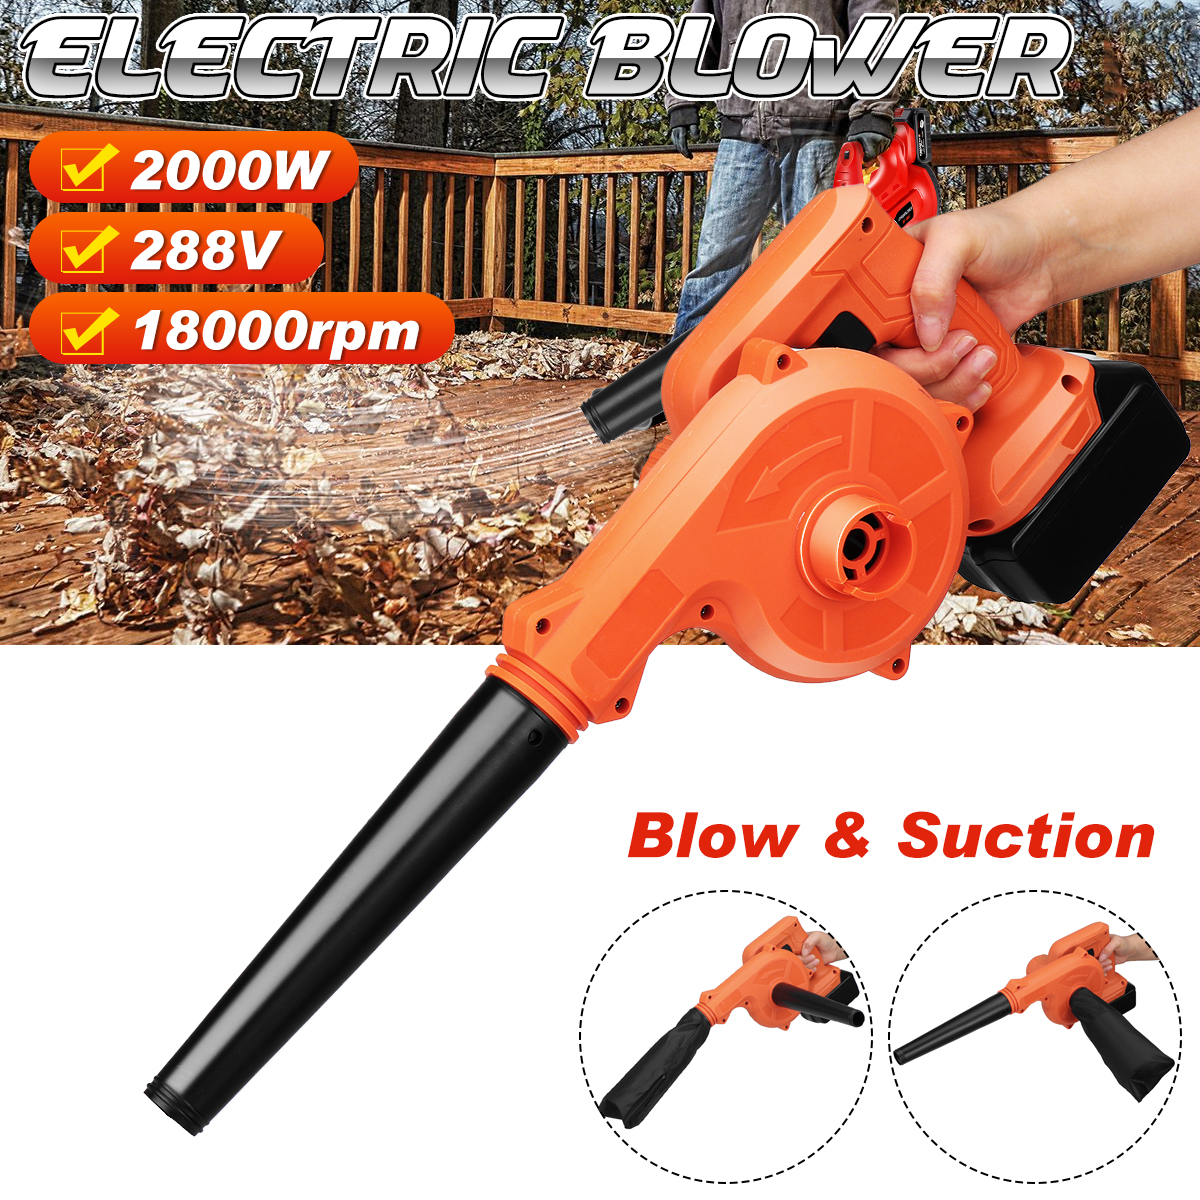 Cordless-Electric-Air-Blower-Leaf-Sweeper-Vacuum-Suction-Hose-Dust-Collector-Computer-Cleaner-For-Ma-1878865-2